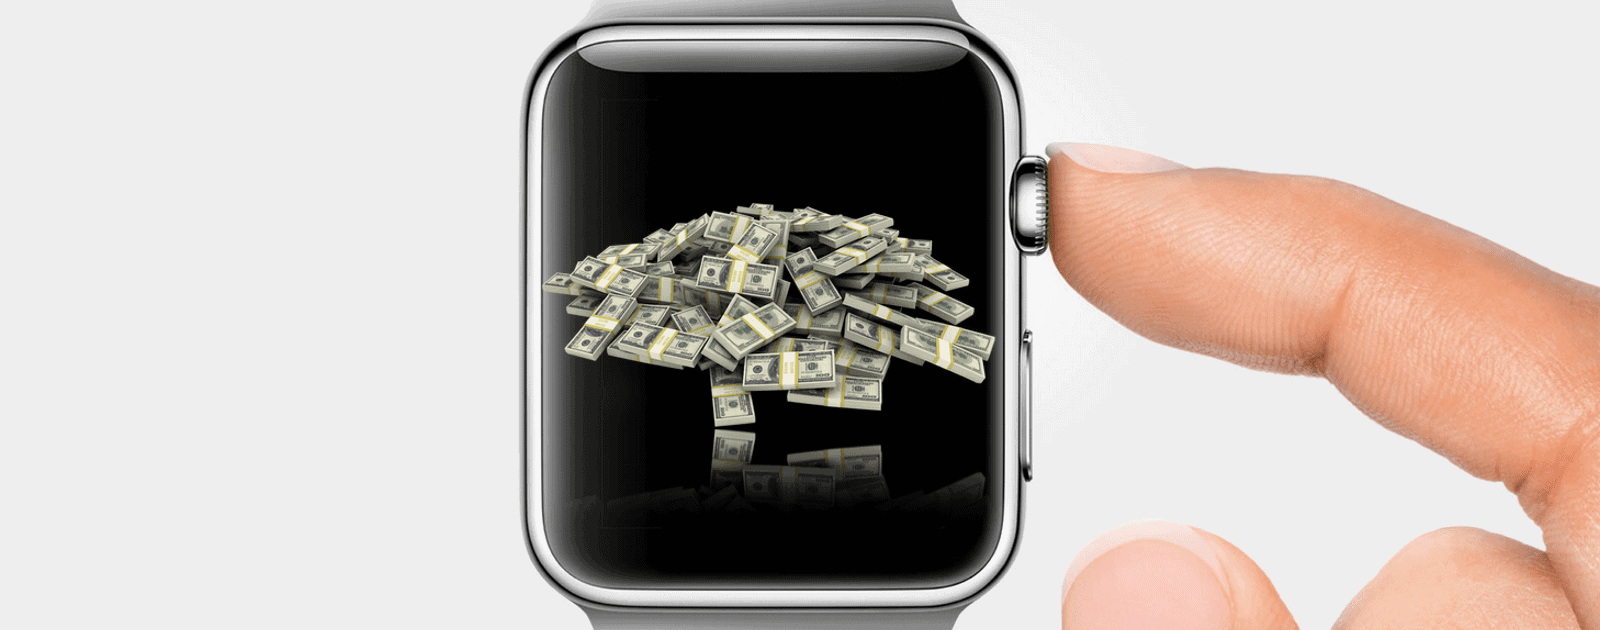 Apple Watch Business is Equal to a Fortune 300 Company, Up 50%